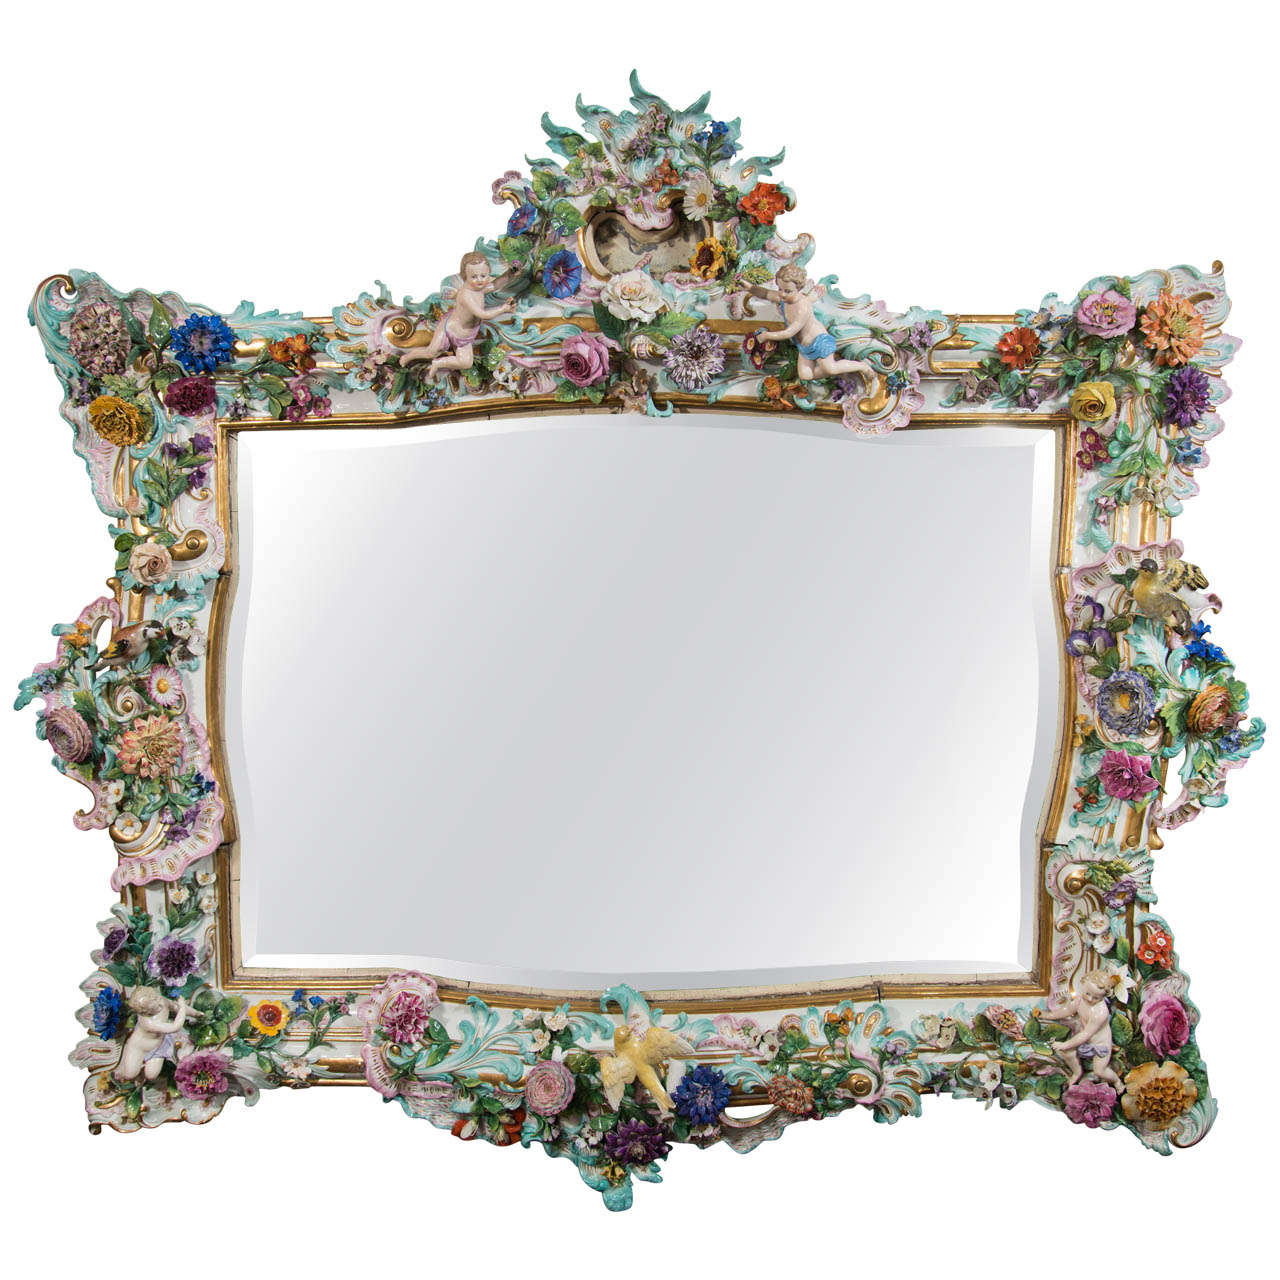 A Highly Important Antique German Meissen Porcelain Figural Mirror, 19th Century For Sale